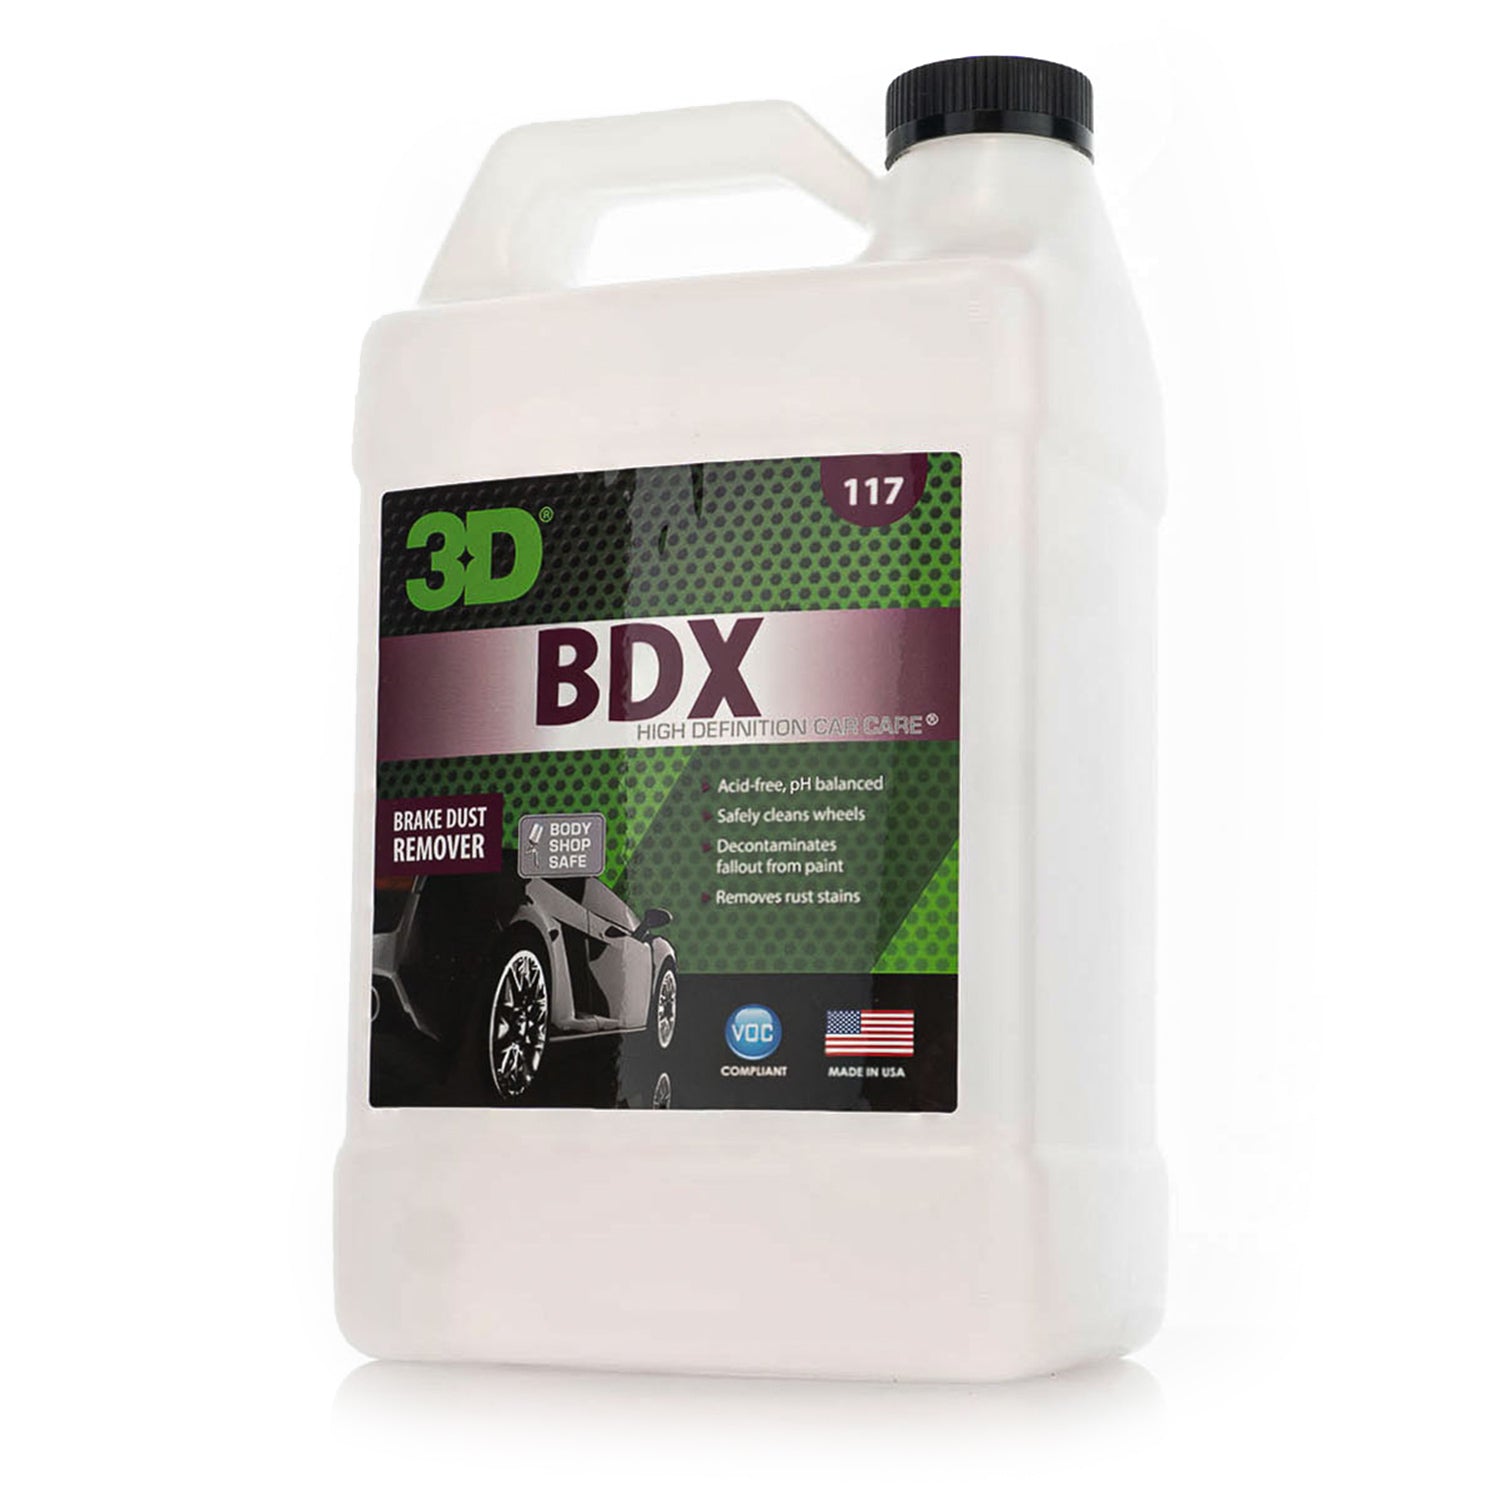 bdx-iron-remover-and-wheel-cleaner-1-gallon